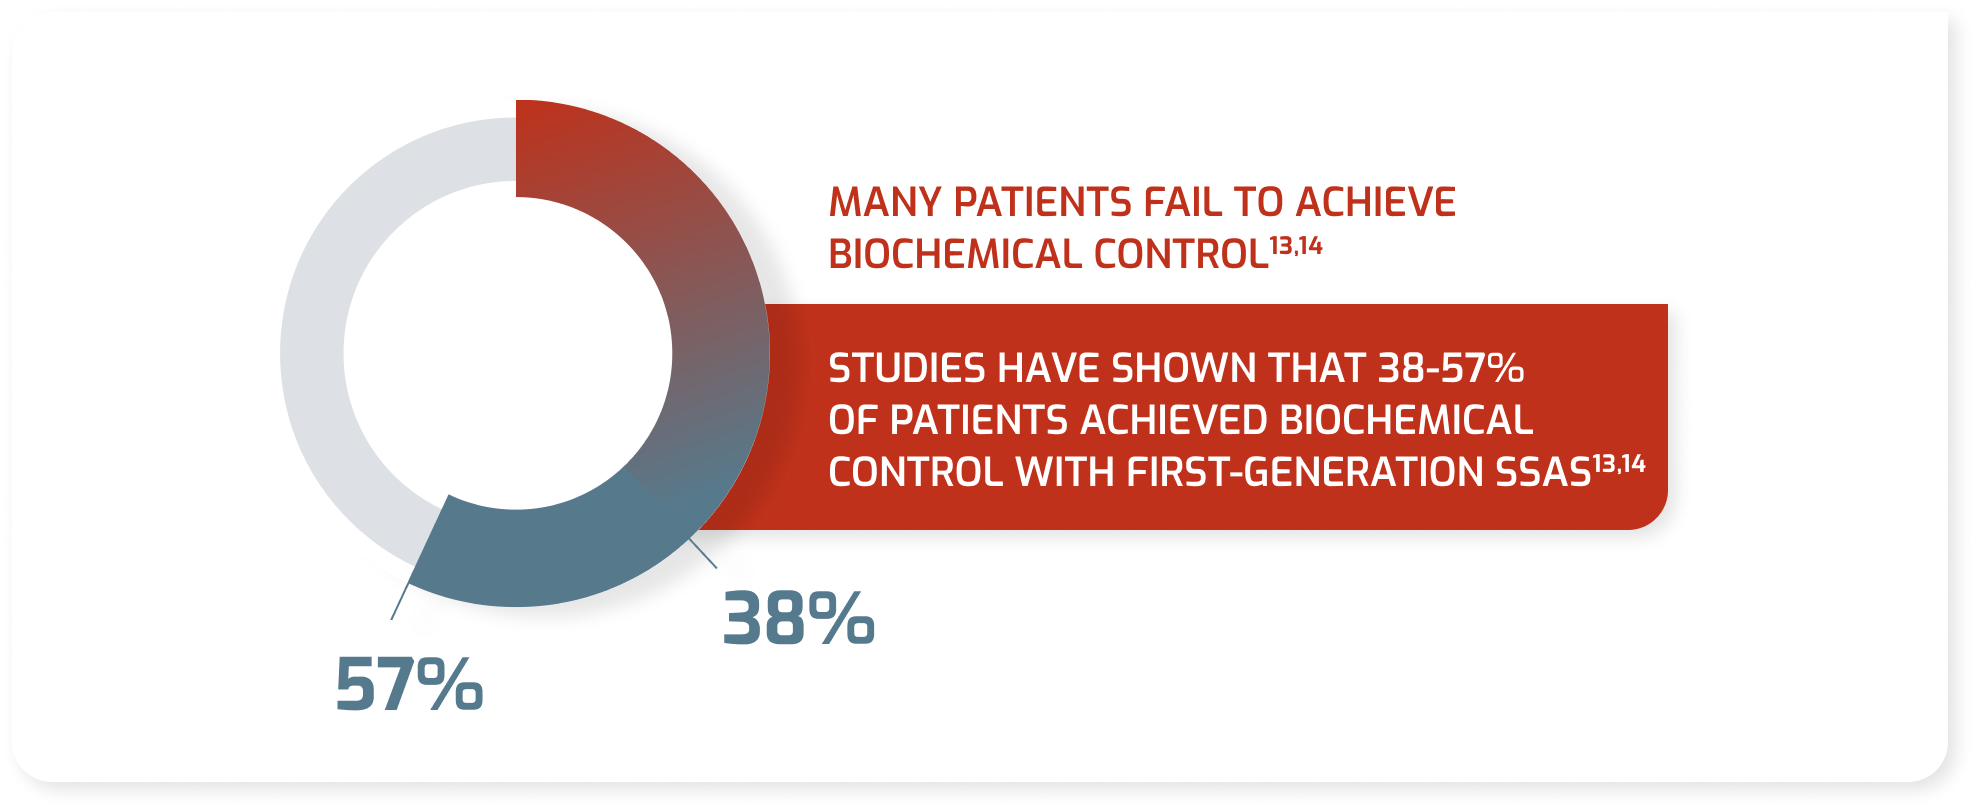 Studies have shown that 38-57% of patients achieved biochemical control with first-generation SSAs